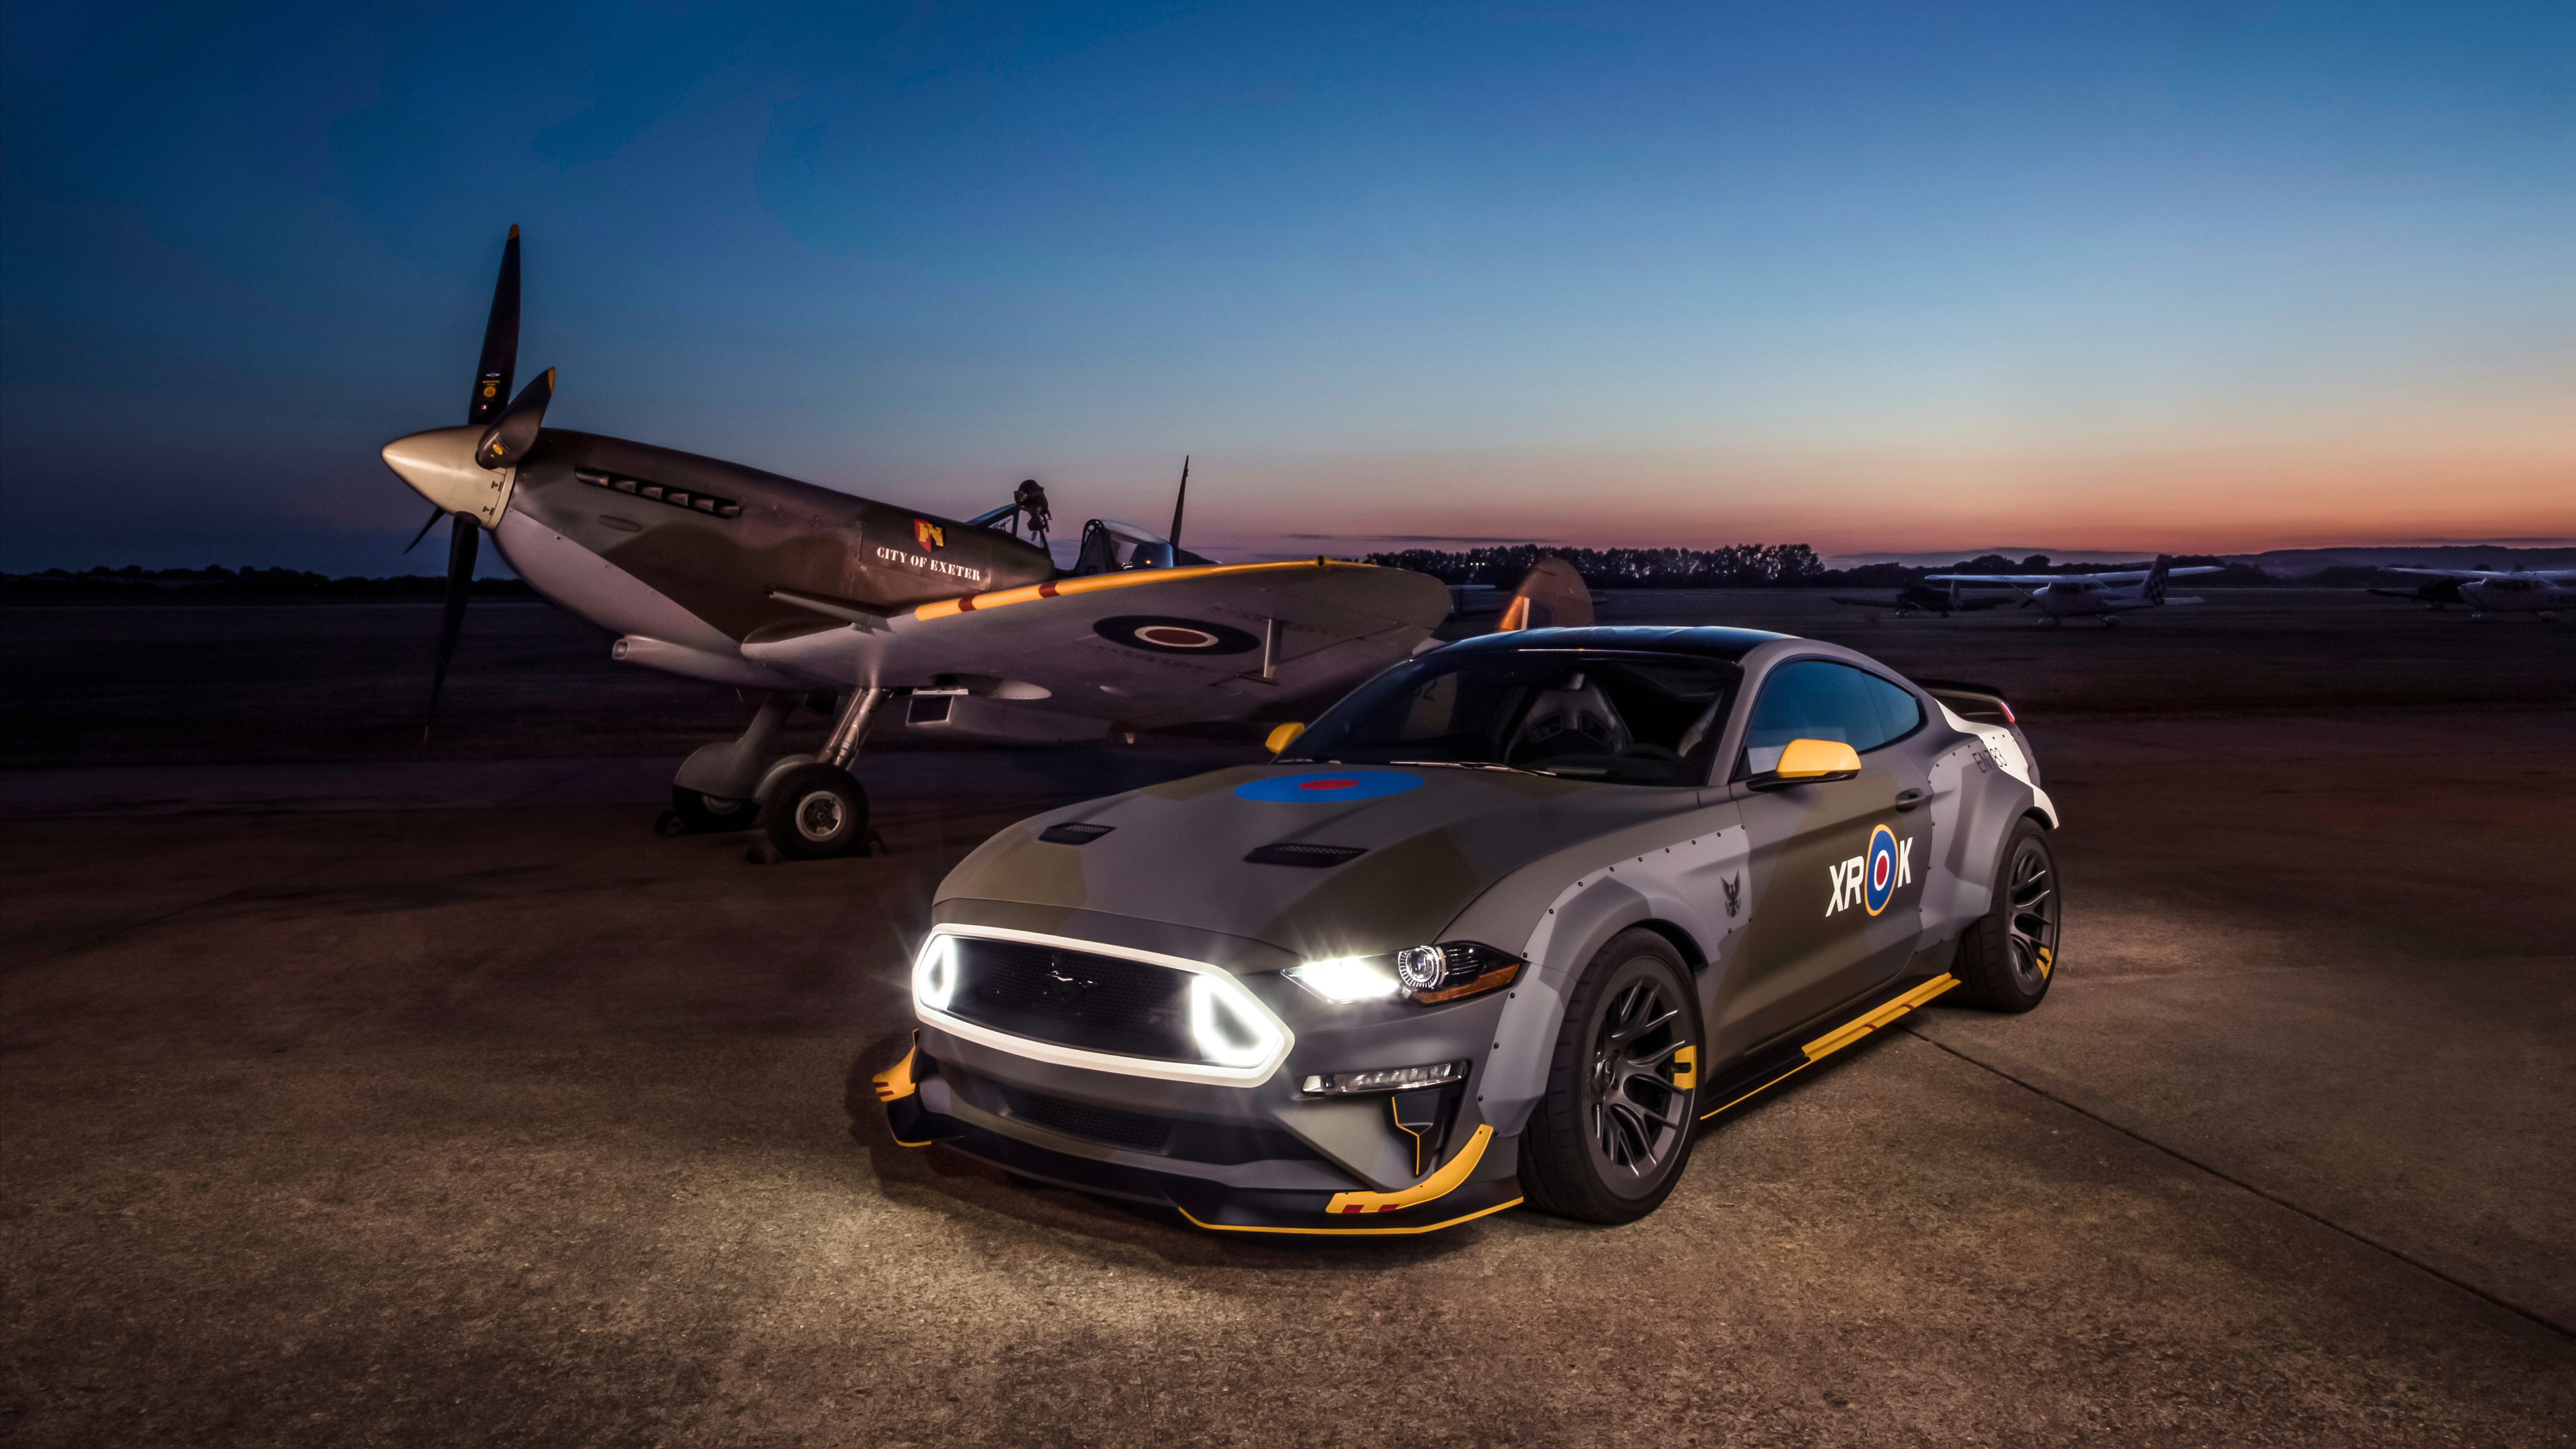 Ford Eagle Squadron Mustang GT 2018 4K 2 Wallpaper | HD ...